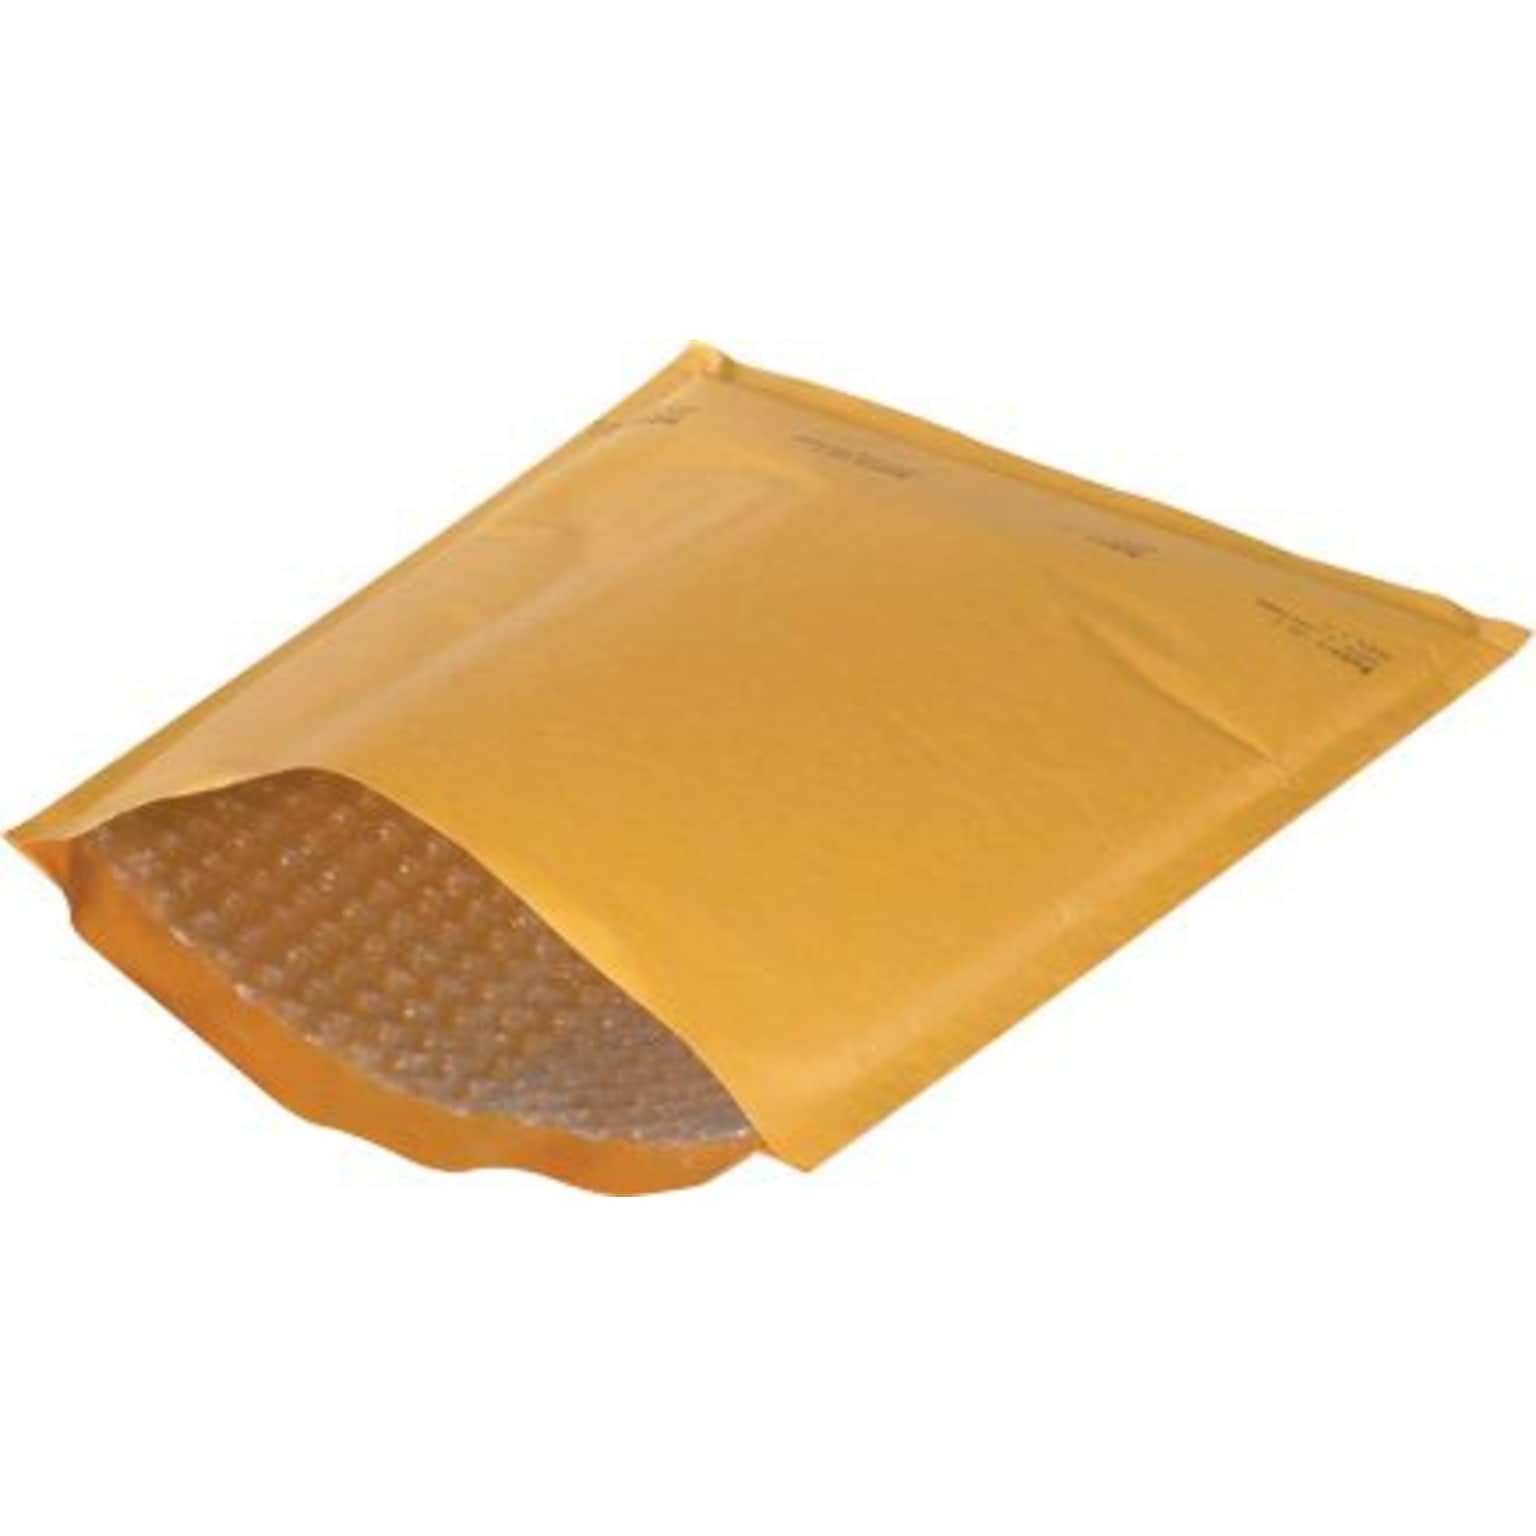 Quill Brand® 6 x 10 Kraft #0 Heat-Seal Bubble Mailers, 25/Case